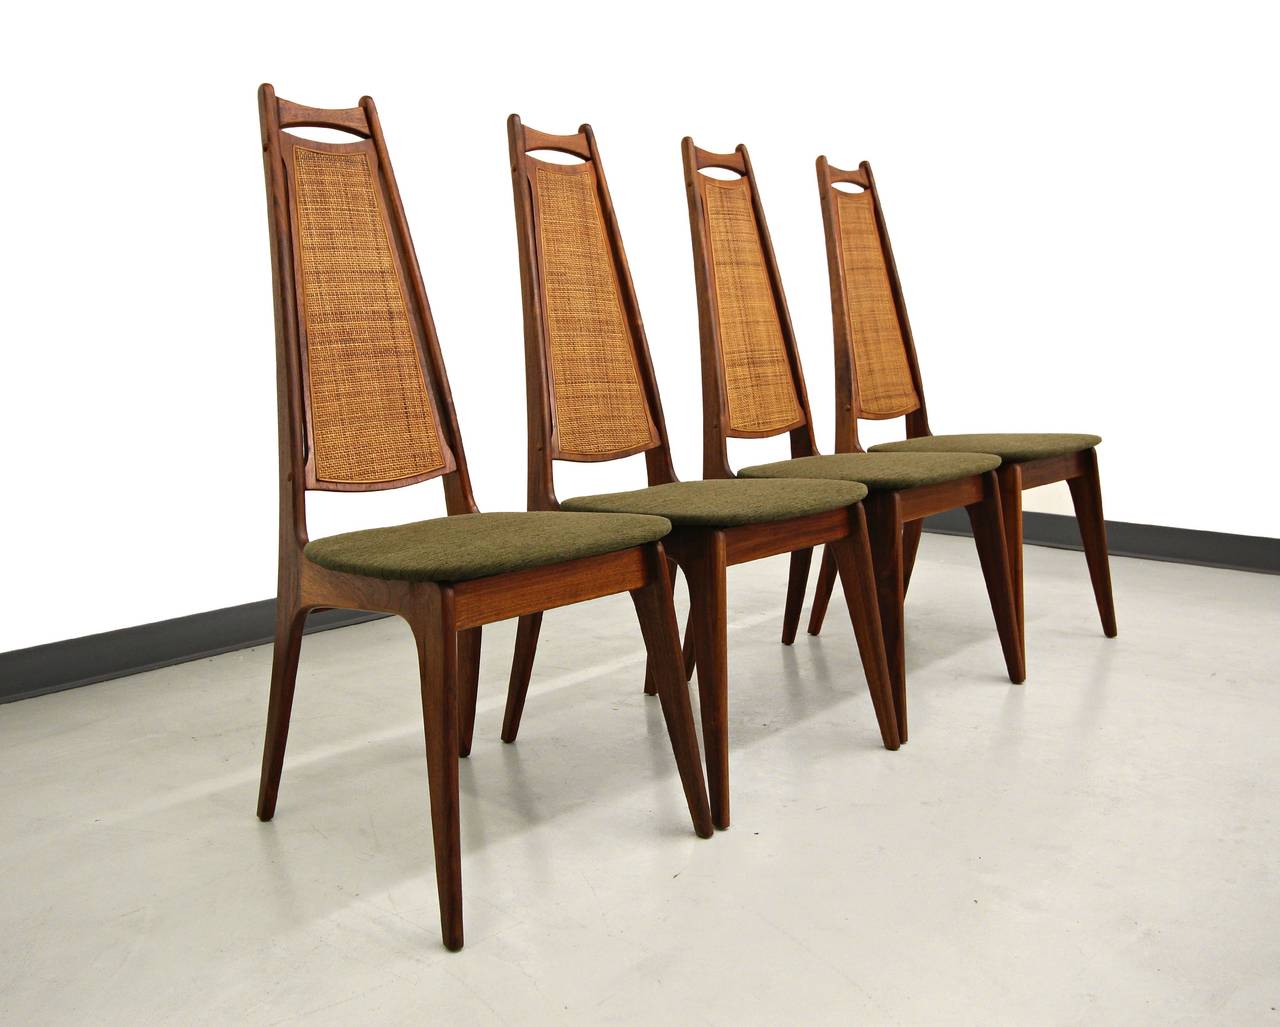 Set of 4 Mid Century Walnut & Cane Dining Chairs Attributed to Adrian Pearsall.  Beautiful sculpted walnut frames with prefect, all original, cane backs.  Chairs have been  reupholstered.